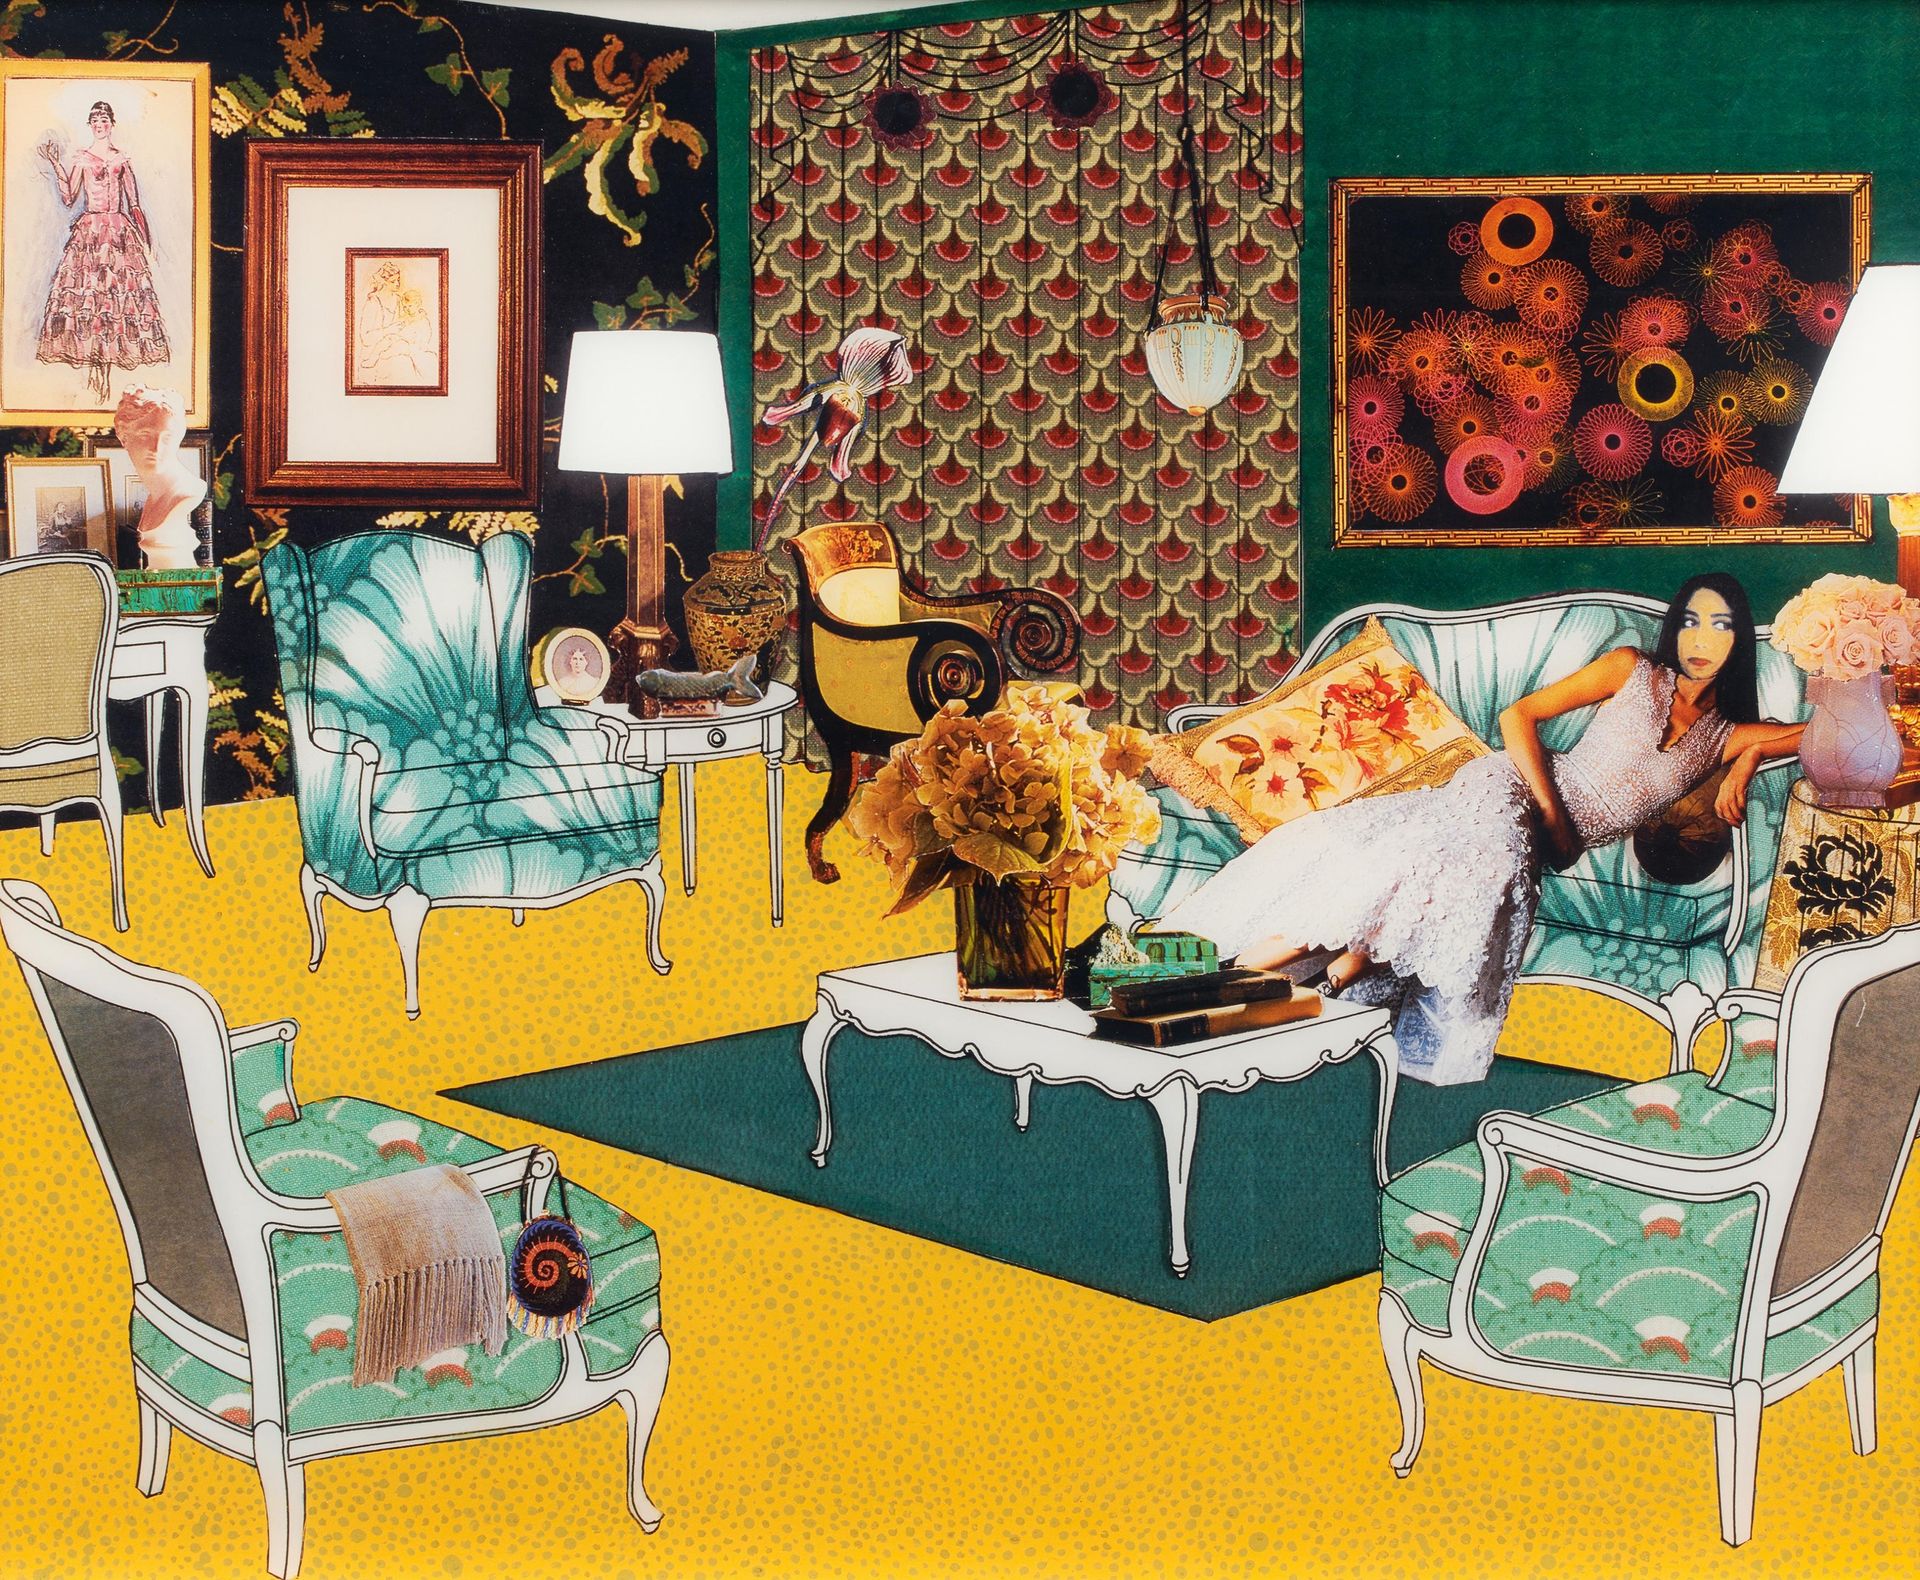 Laurie Simmons SIMMONS, LAURIE
1949 New York

Titolo: Green Room. 
Sottotitolo: &hellip;